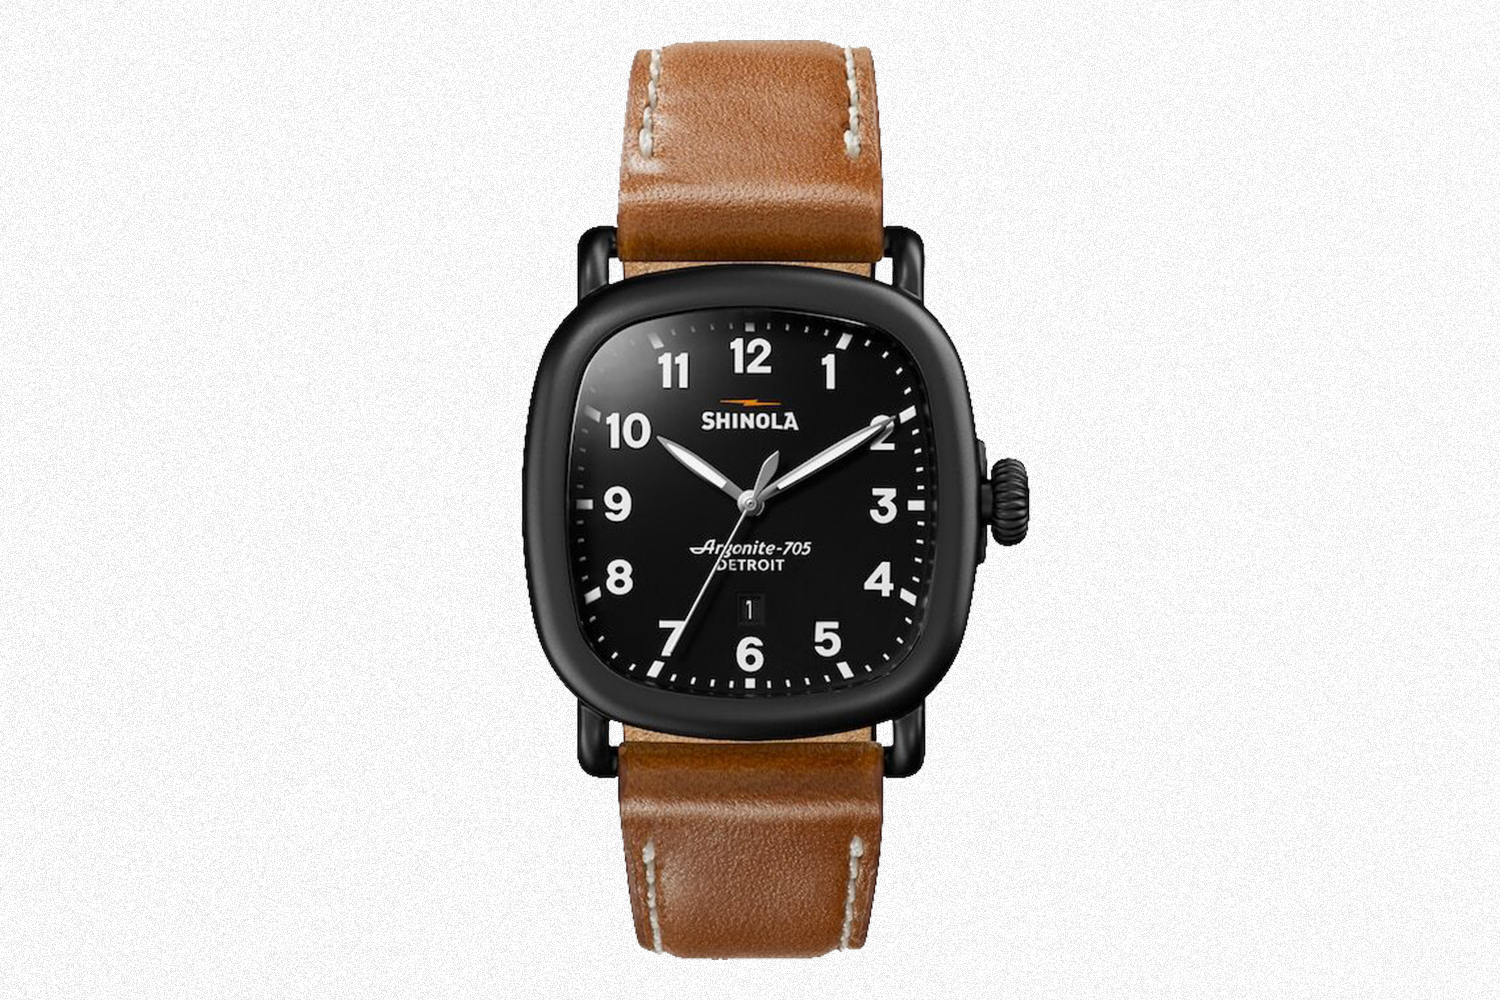 The men's Shinola Guardian watch with a black case and brown leather strap